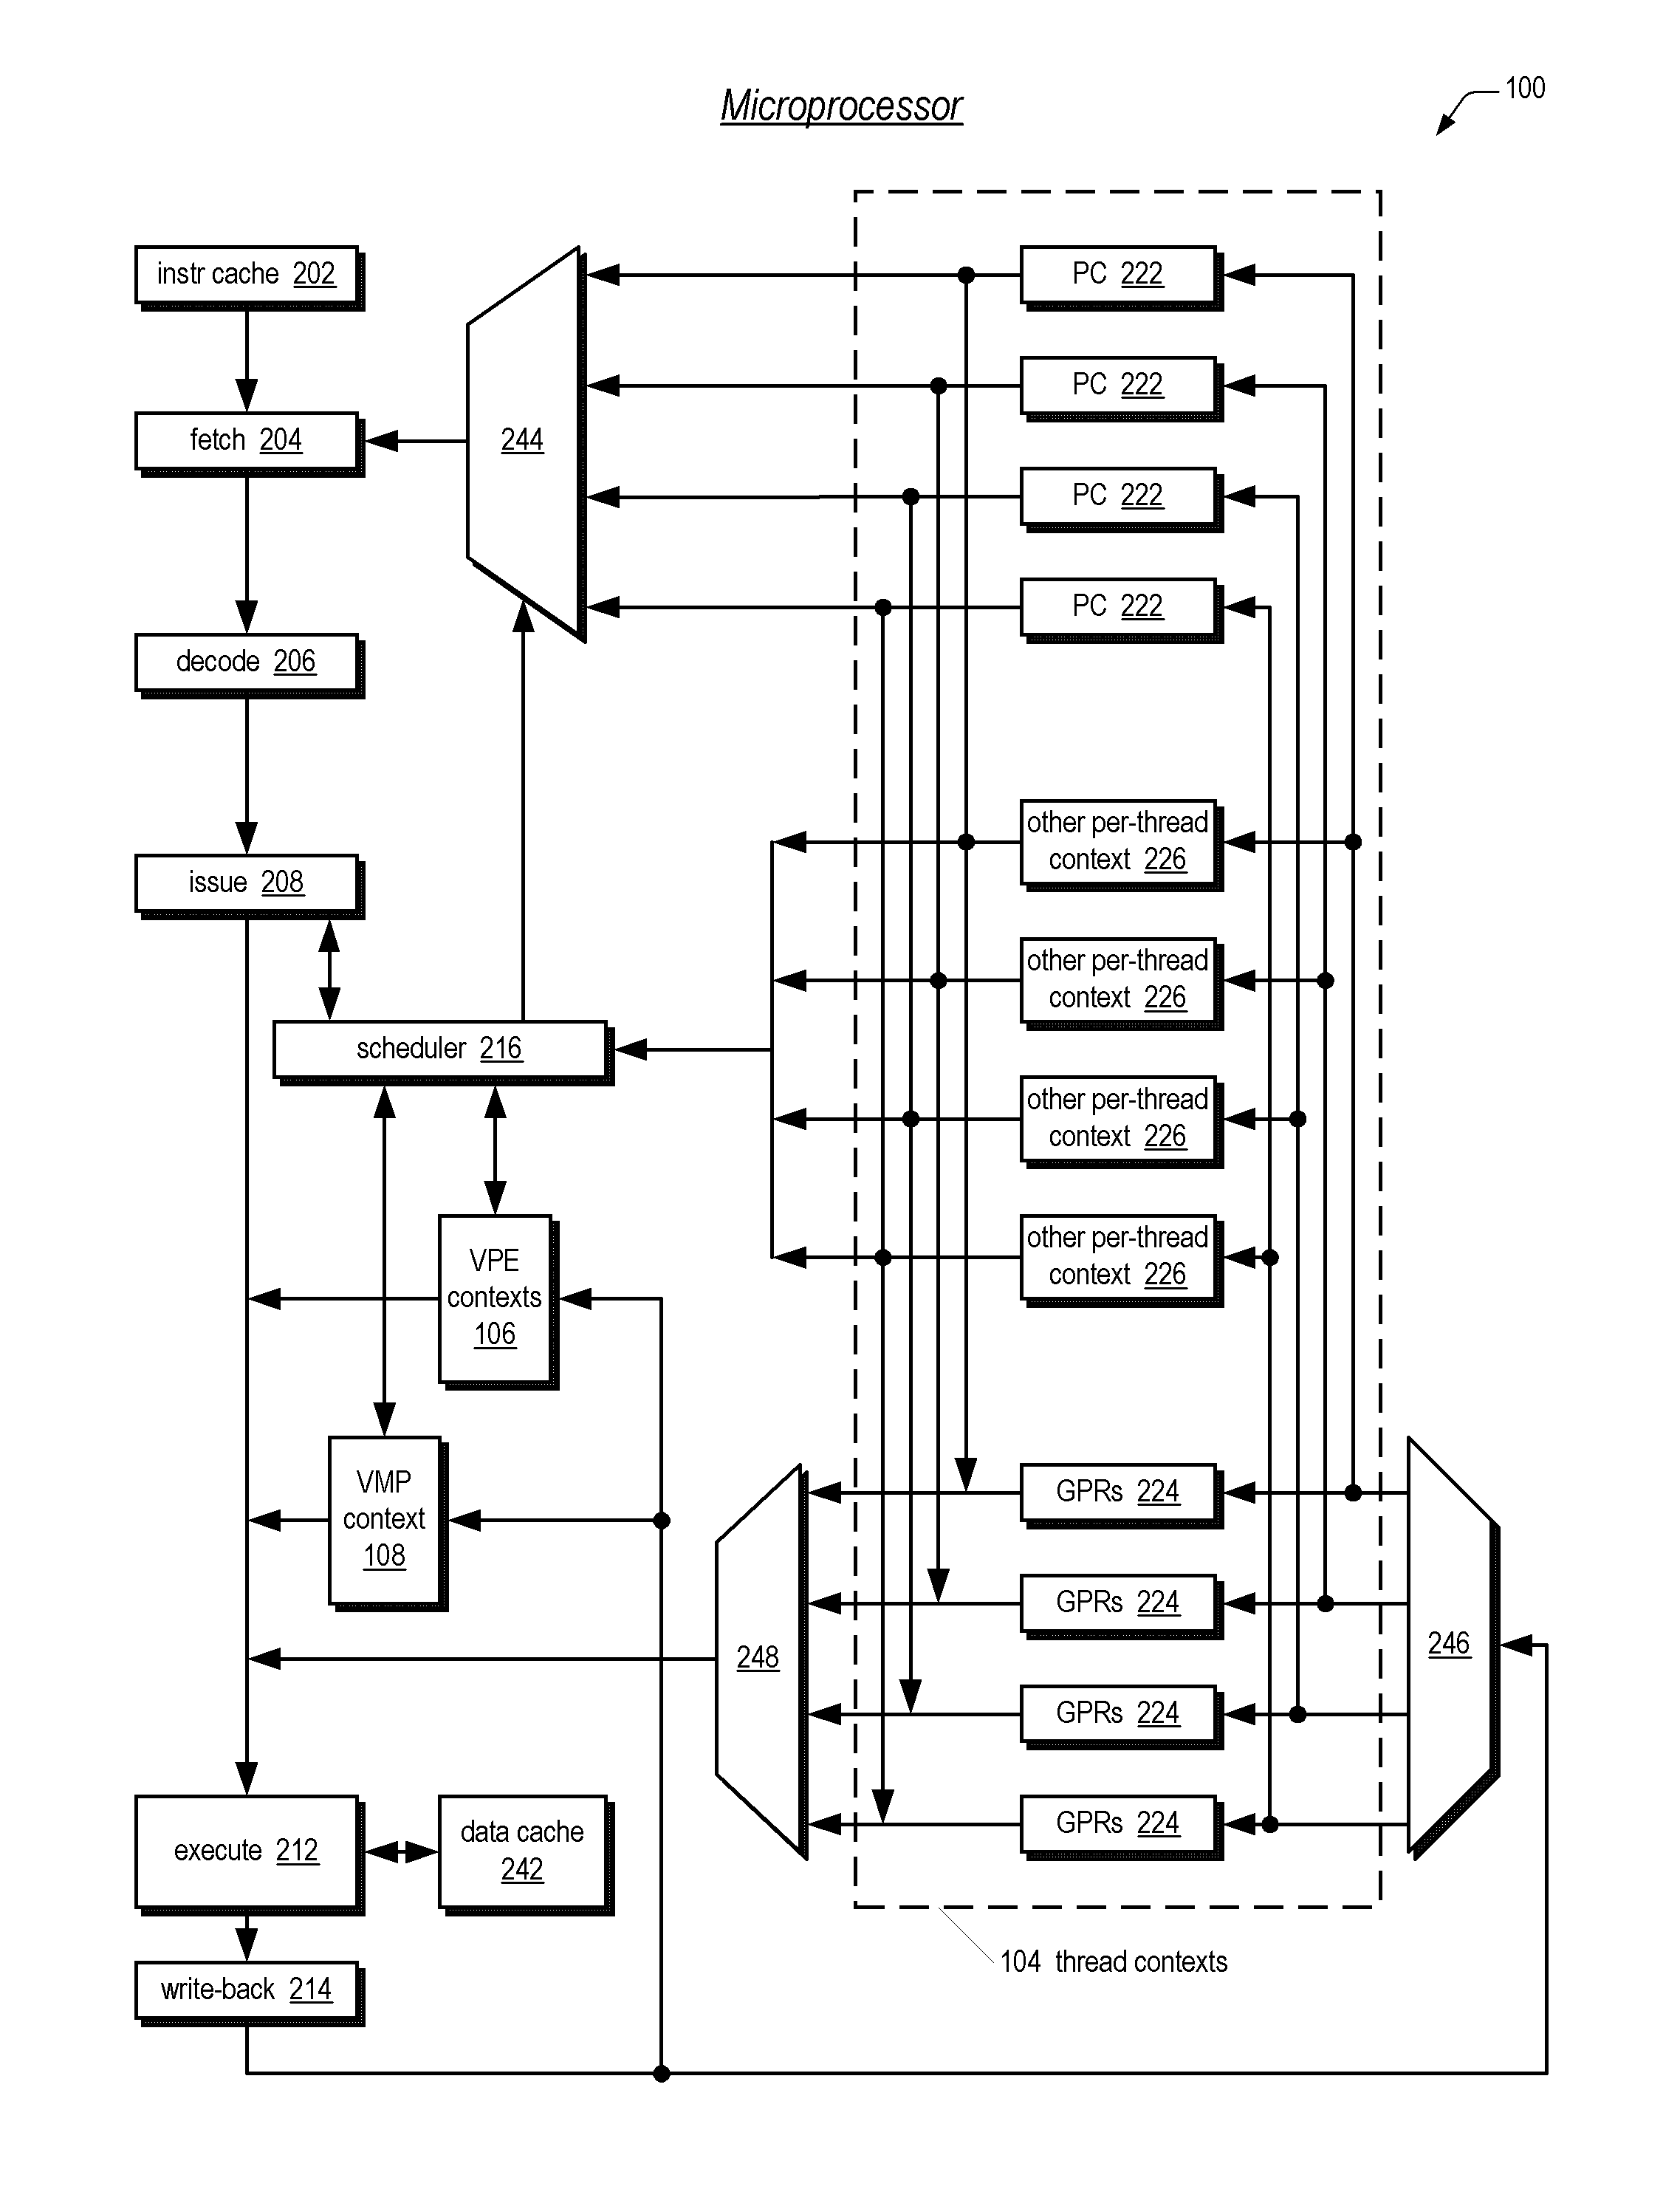 Symmetric multiprocessor operating system for execution on non-independent lightweight thread contexts